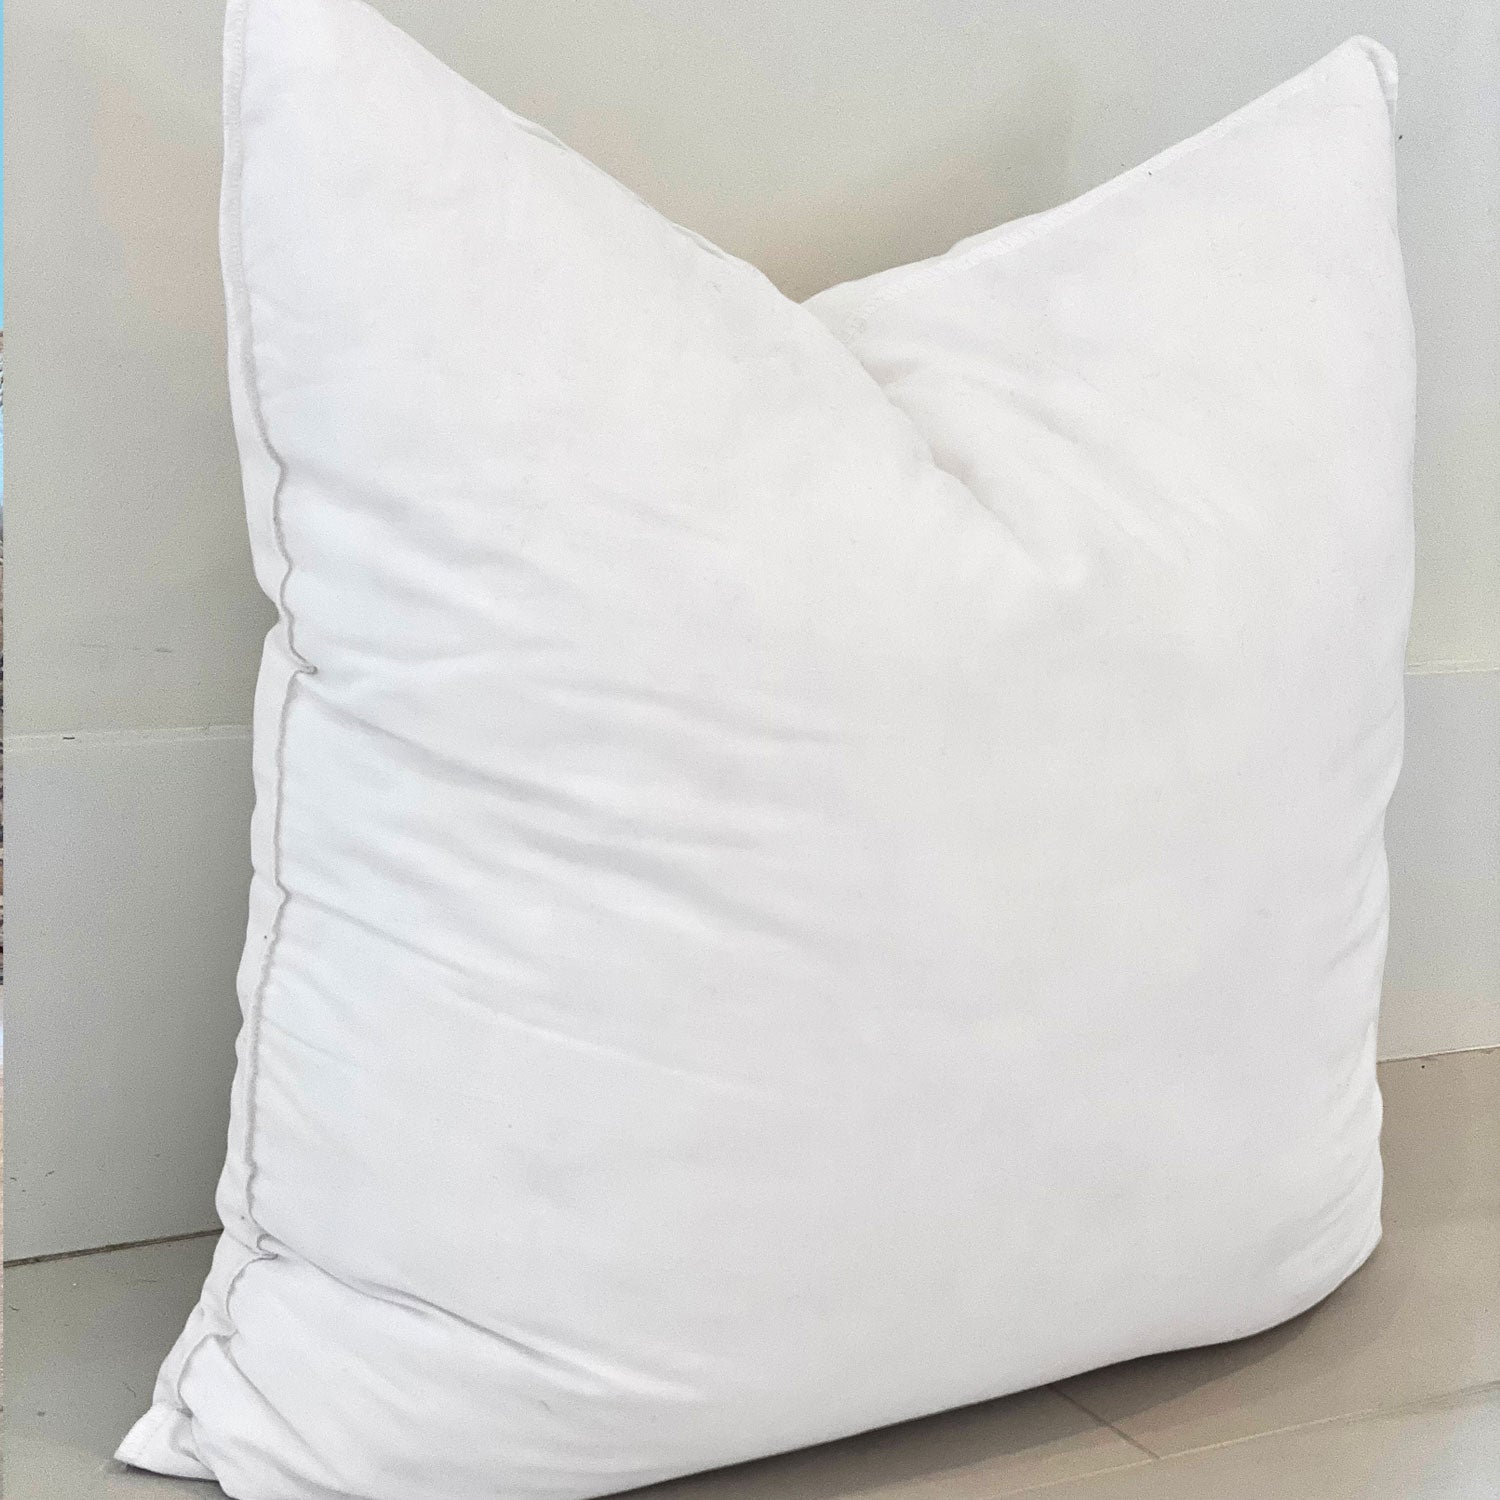 Balance is Everything Pillow Cover – Galey Alix